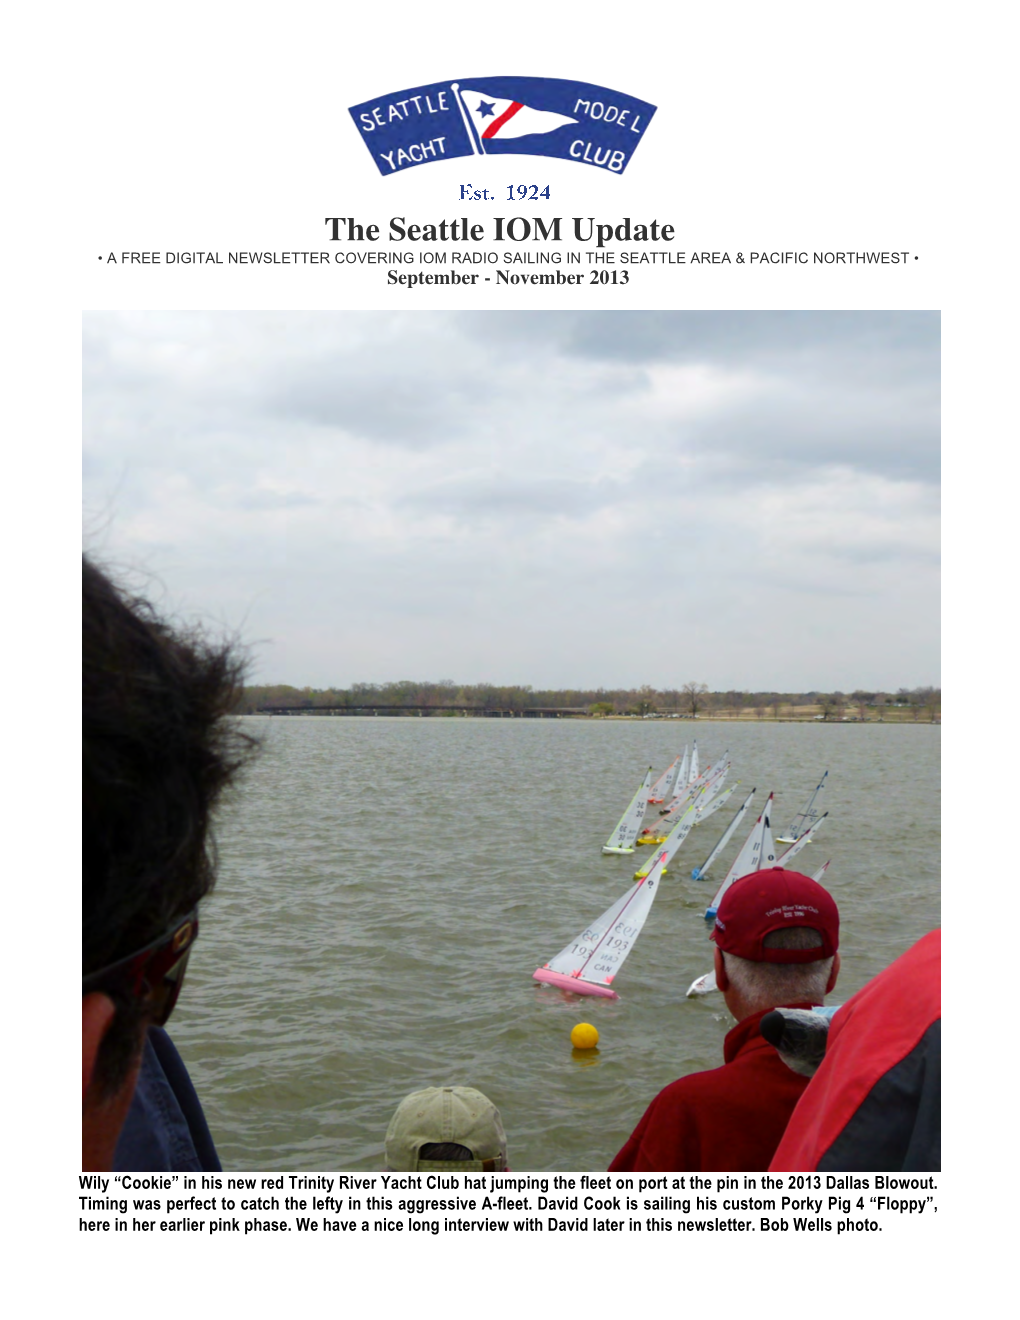 The Seattle IOM Update • a FREE DIGITAL NEWSLETTER COVERING IOM RADIO SAILING in the SEATTLE AREA & PACIFIC NORTHWEST • September - November 2013